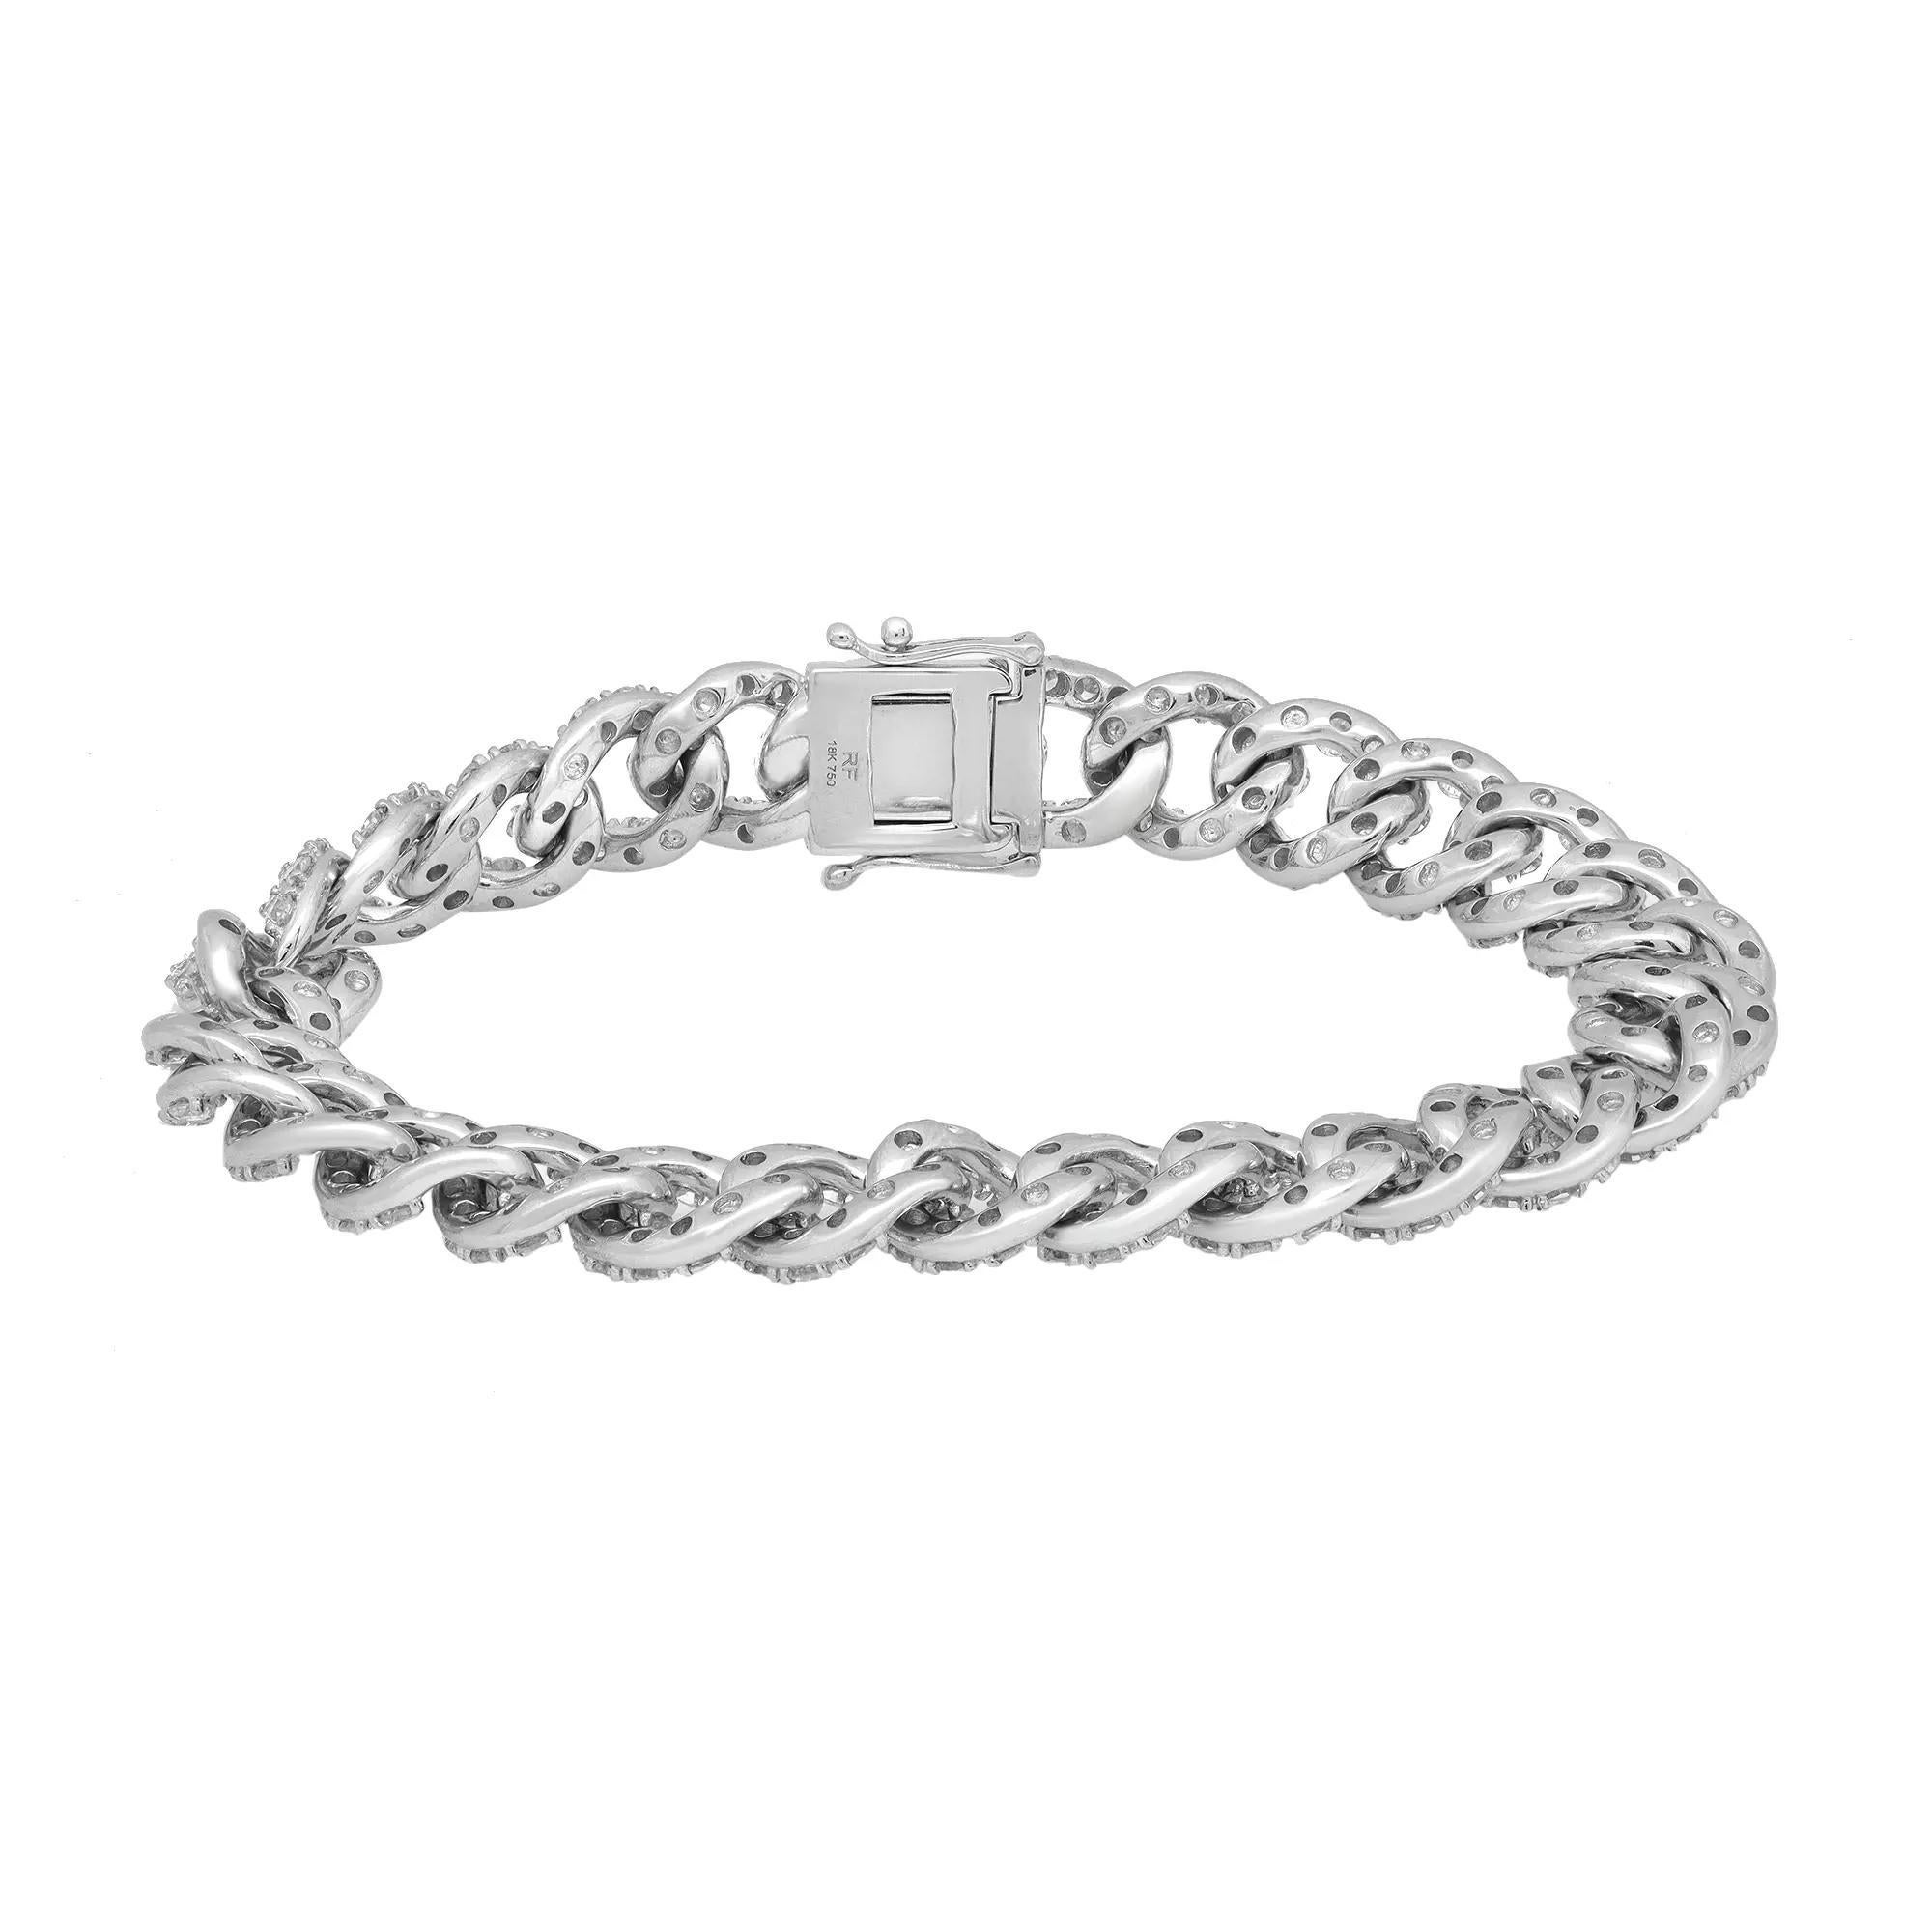 Embrace the classic Cuban link chain bracelet look with this perfect everyday wear stackable bracelet. This elegant bracelet is crafted in lustrous 18K white gold and features prong set round brilliant cut diamonds encrusted all over the bracelet.